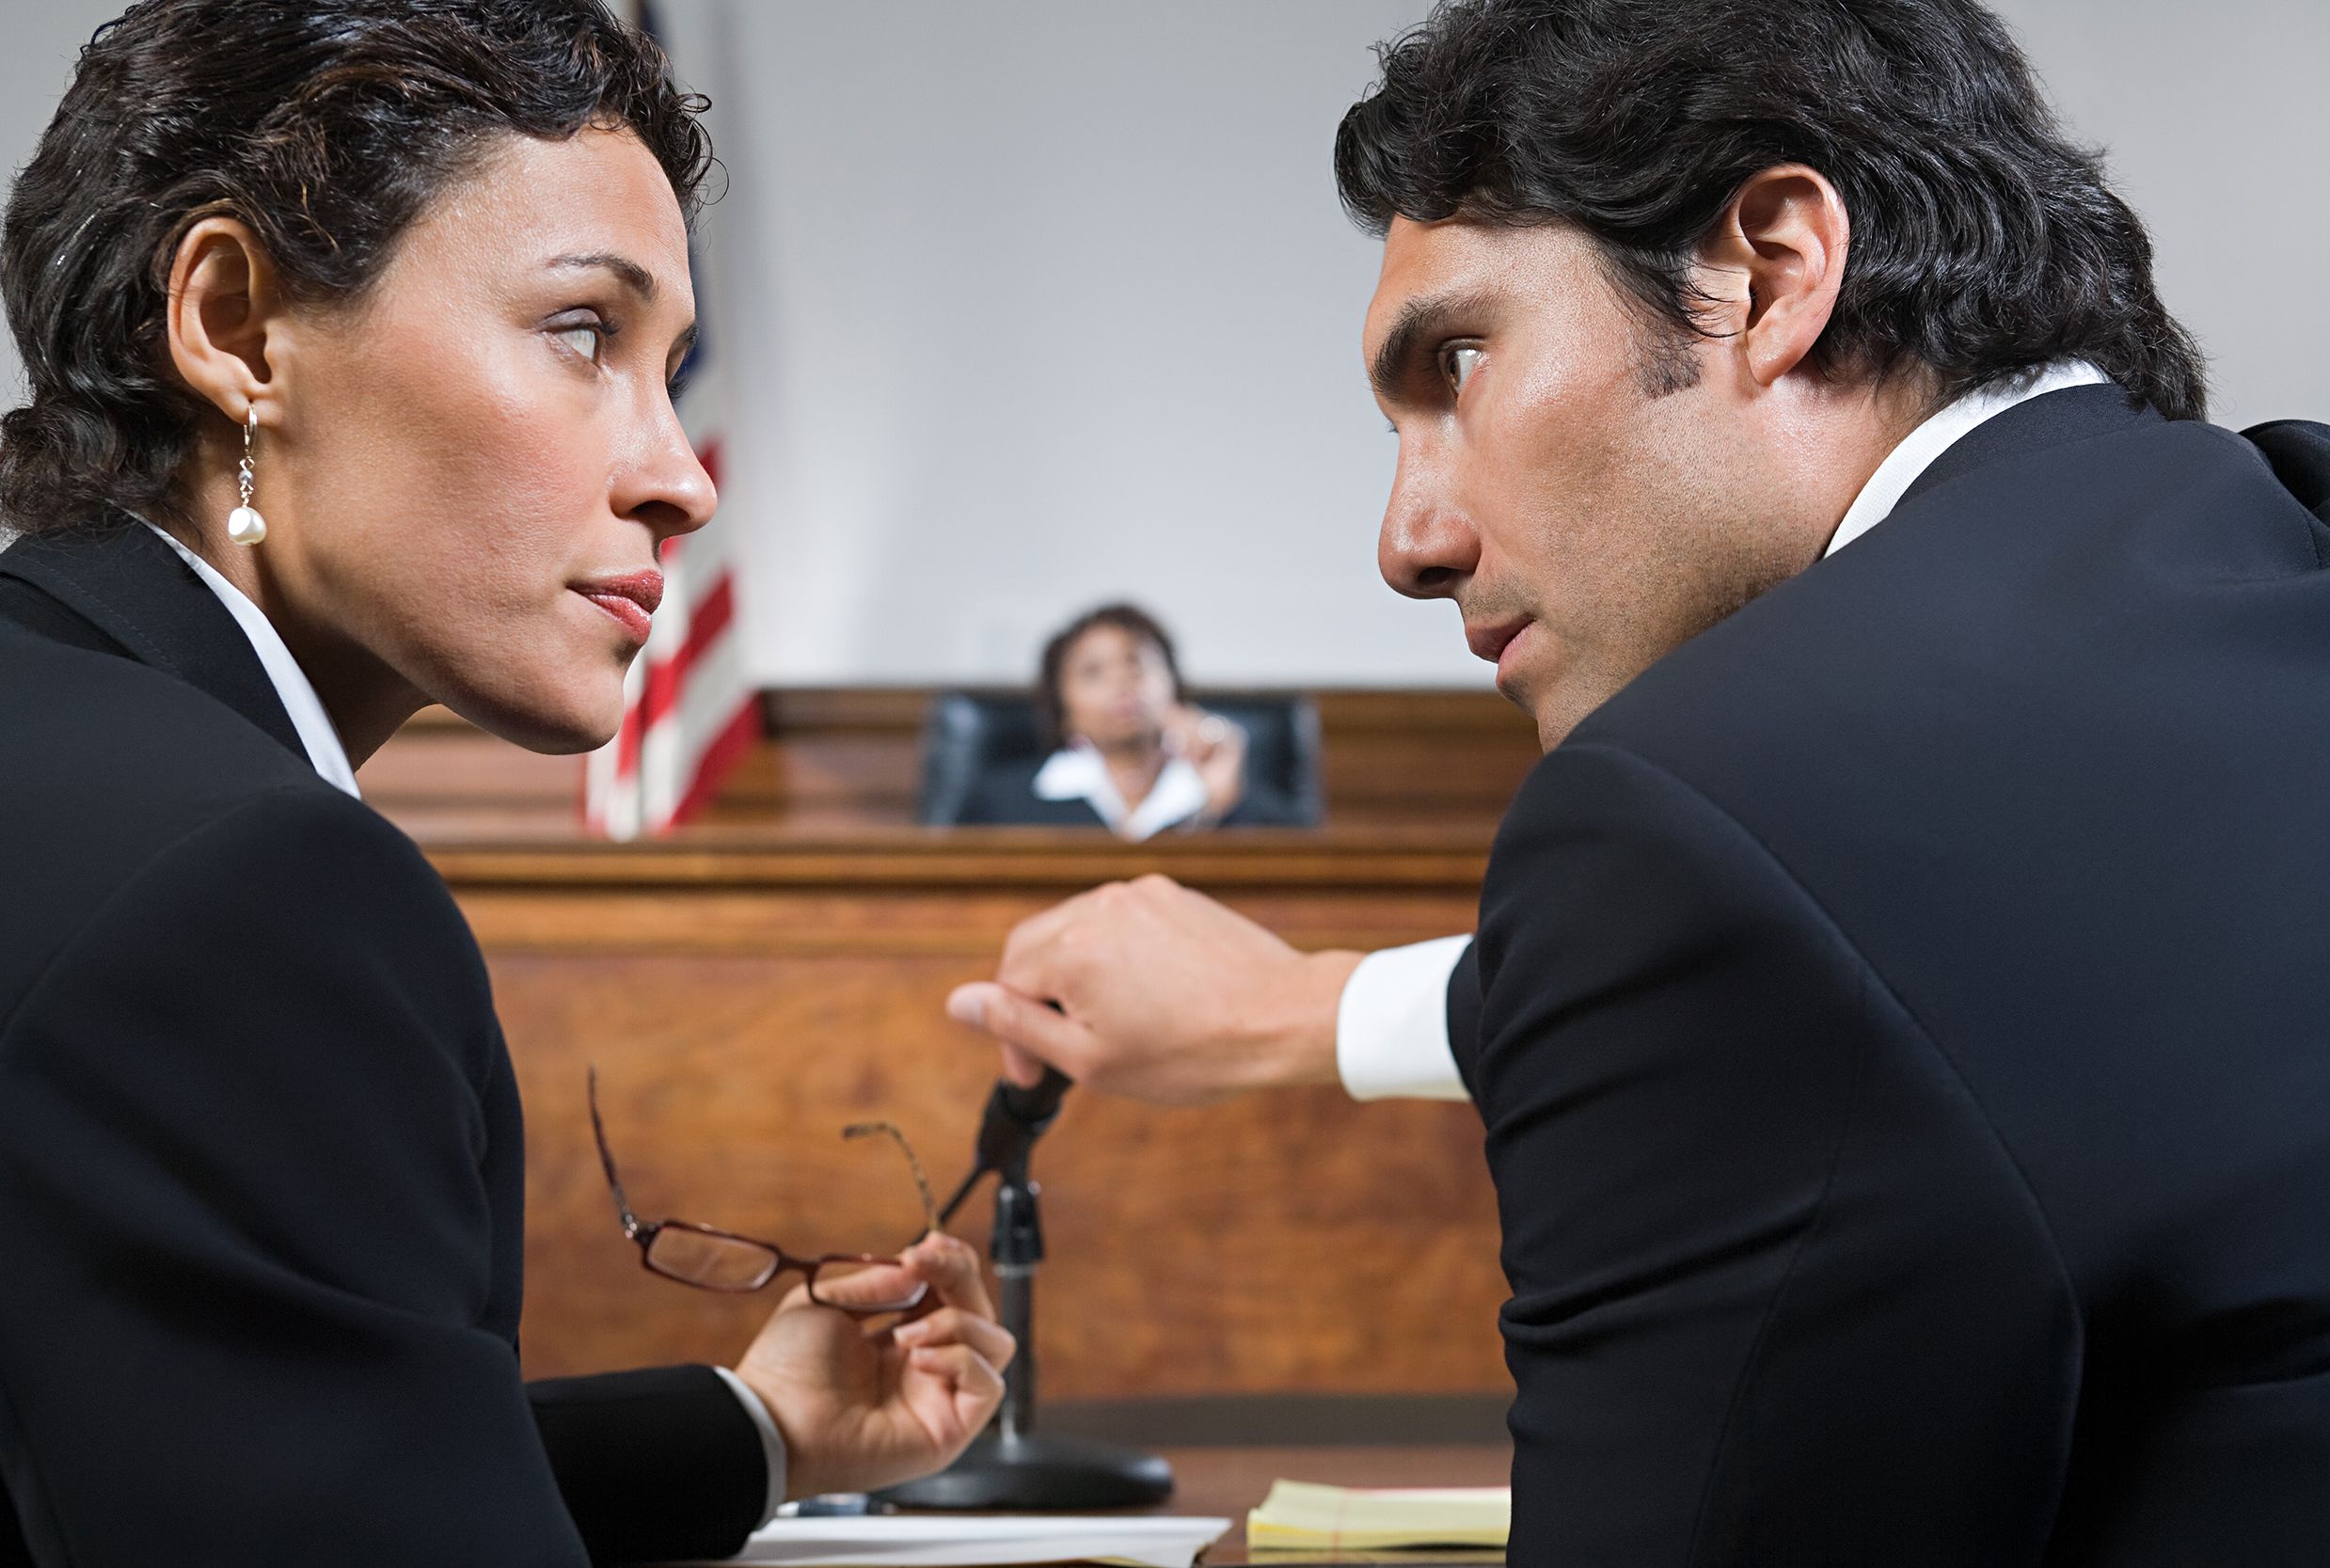 8 Tips on Becoming a Successful Criminal Lawyer